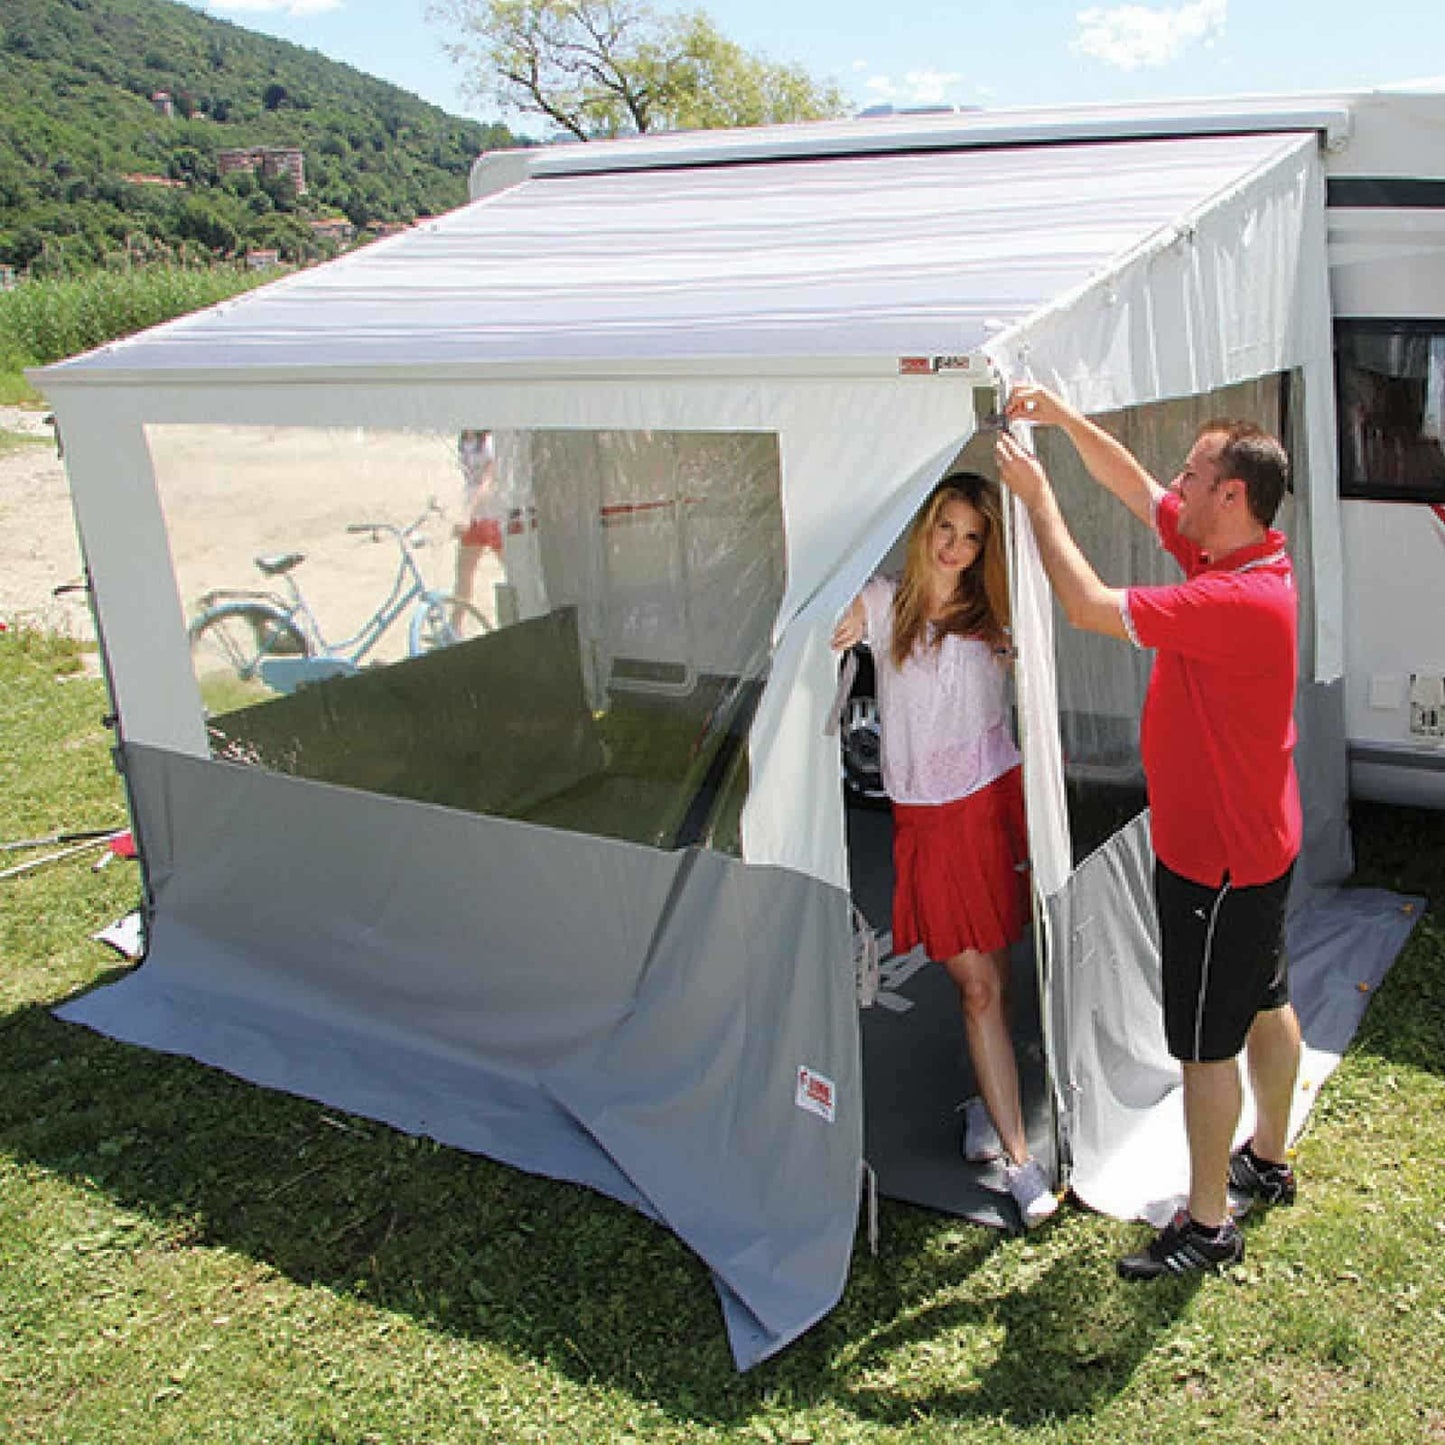 Fiamma Blocker Pro Front Panel made by Fiamma. A Accessories sold by Quality Caravan Awnings